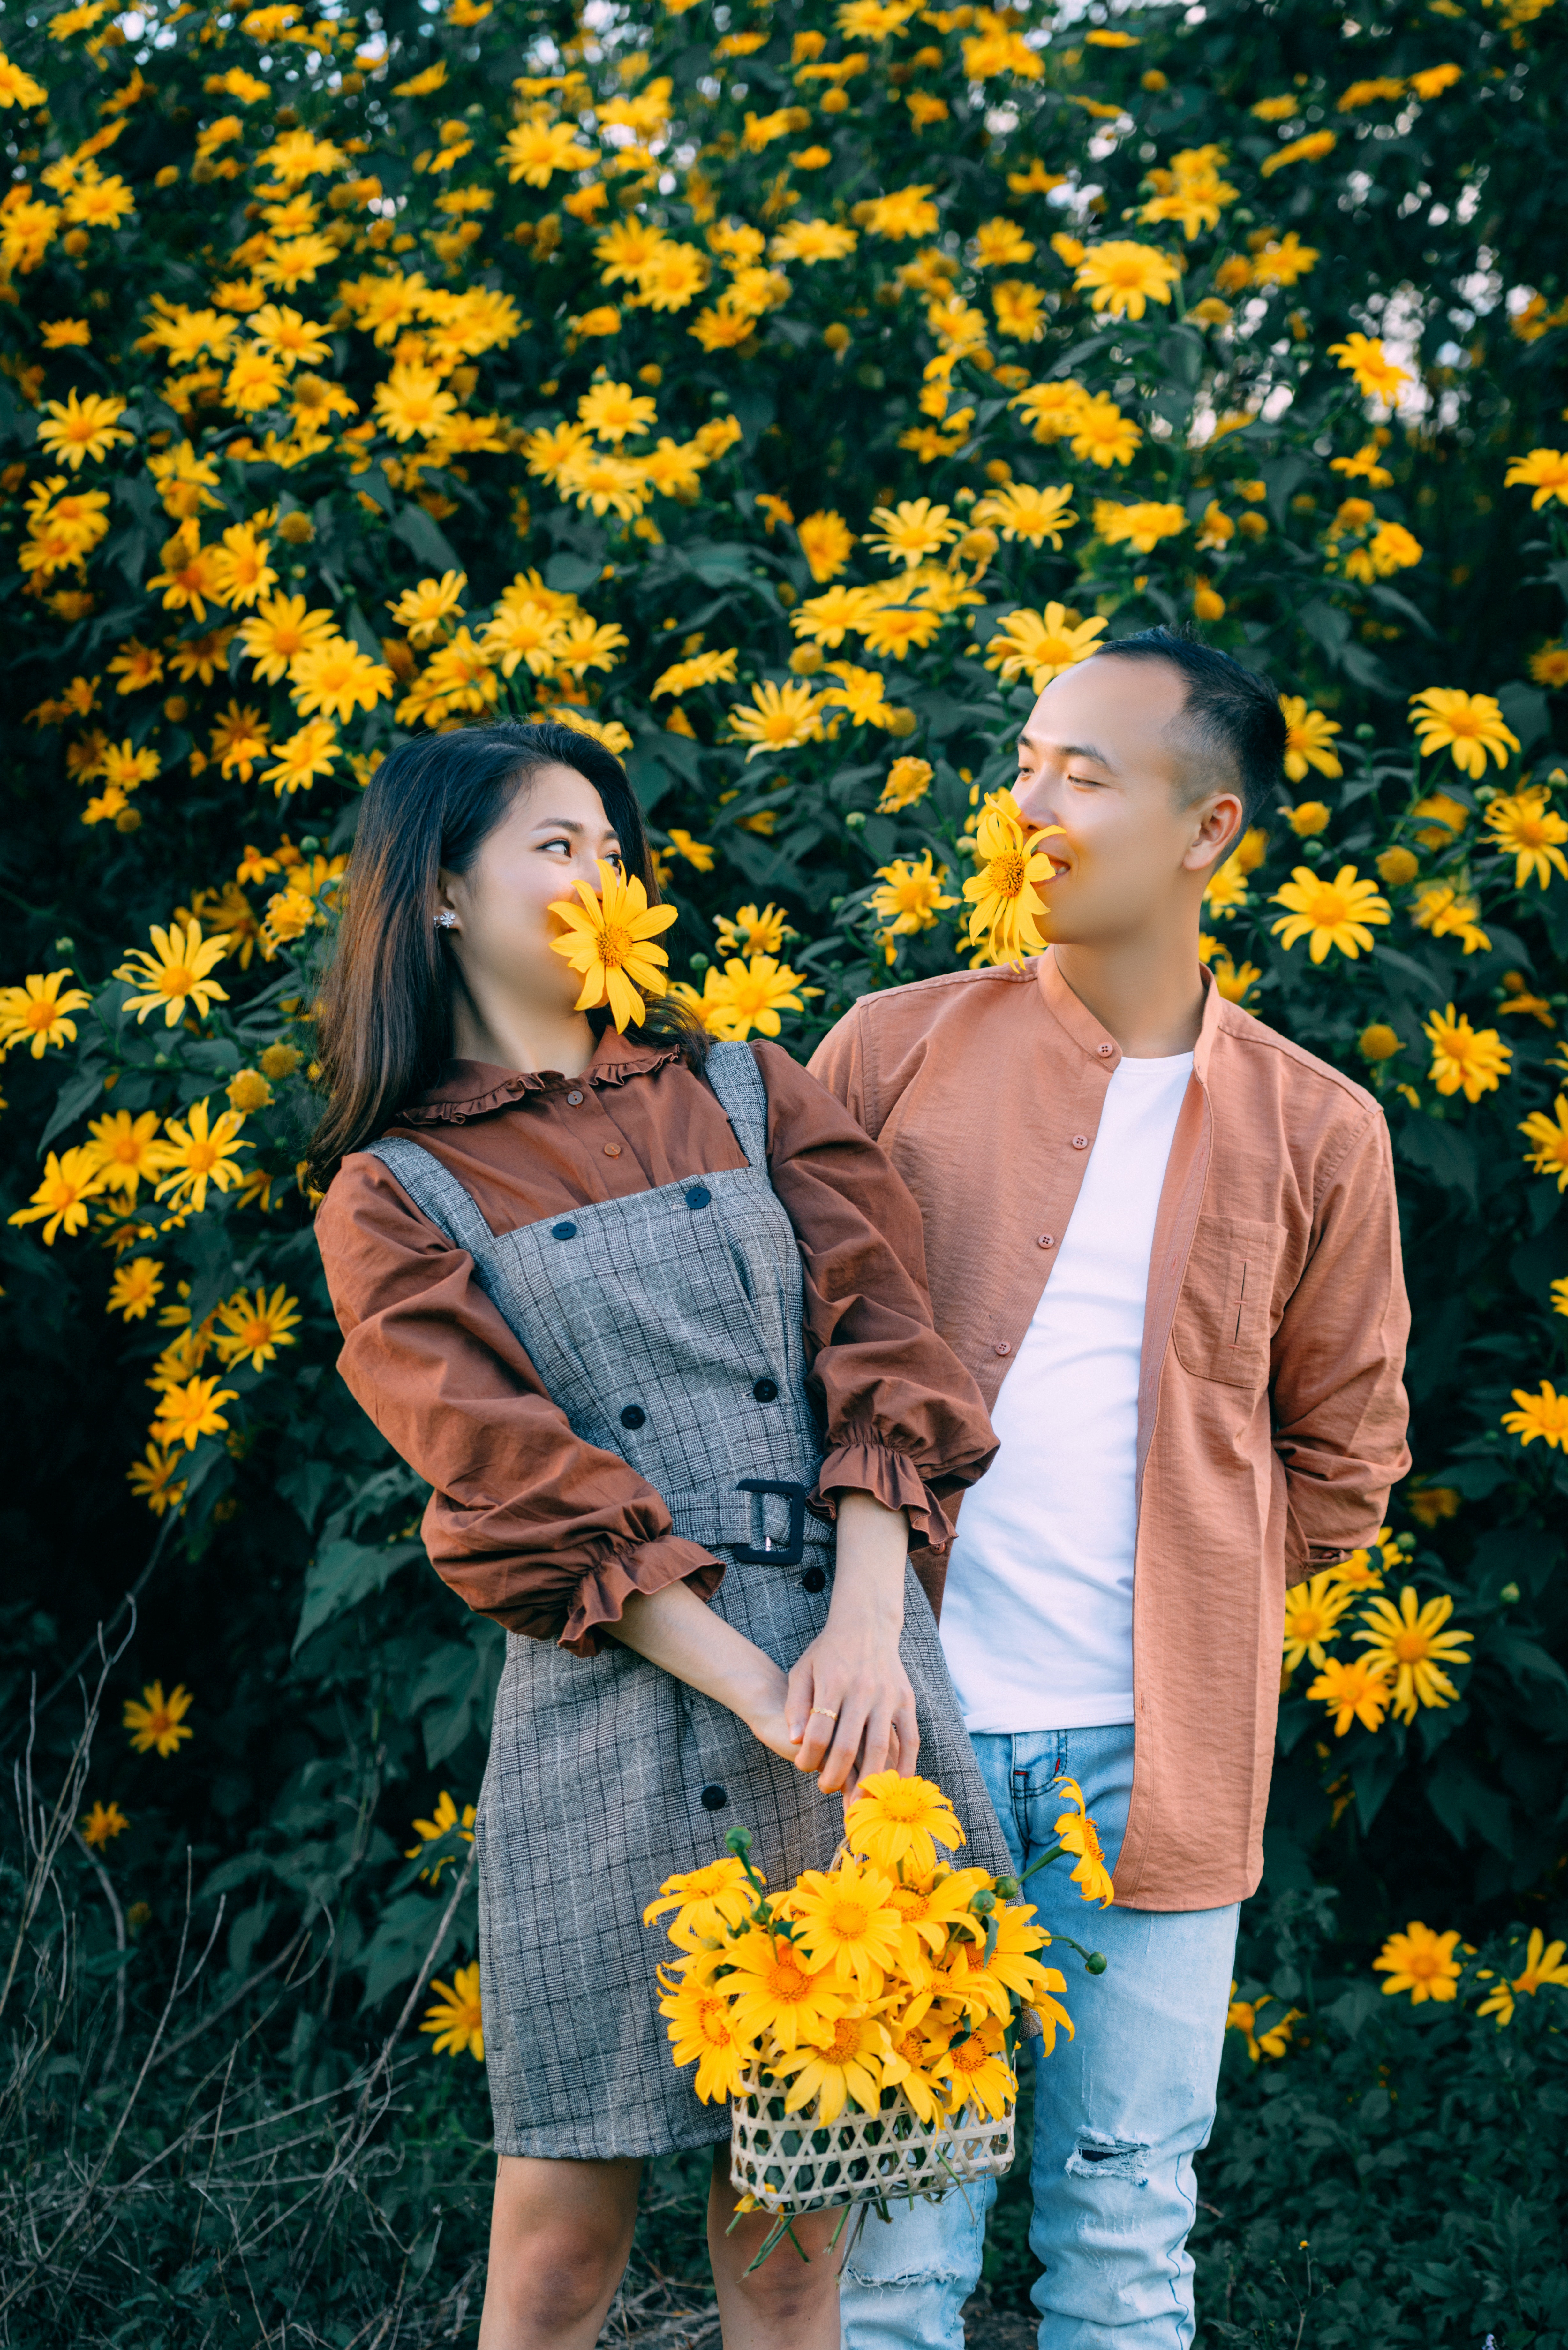 A couple with flowers in their mouths. | Source: Pexels